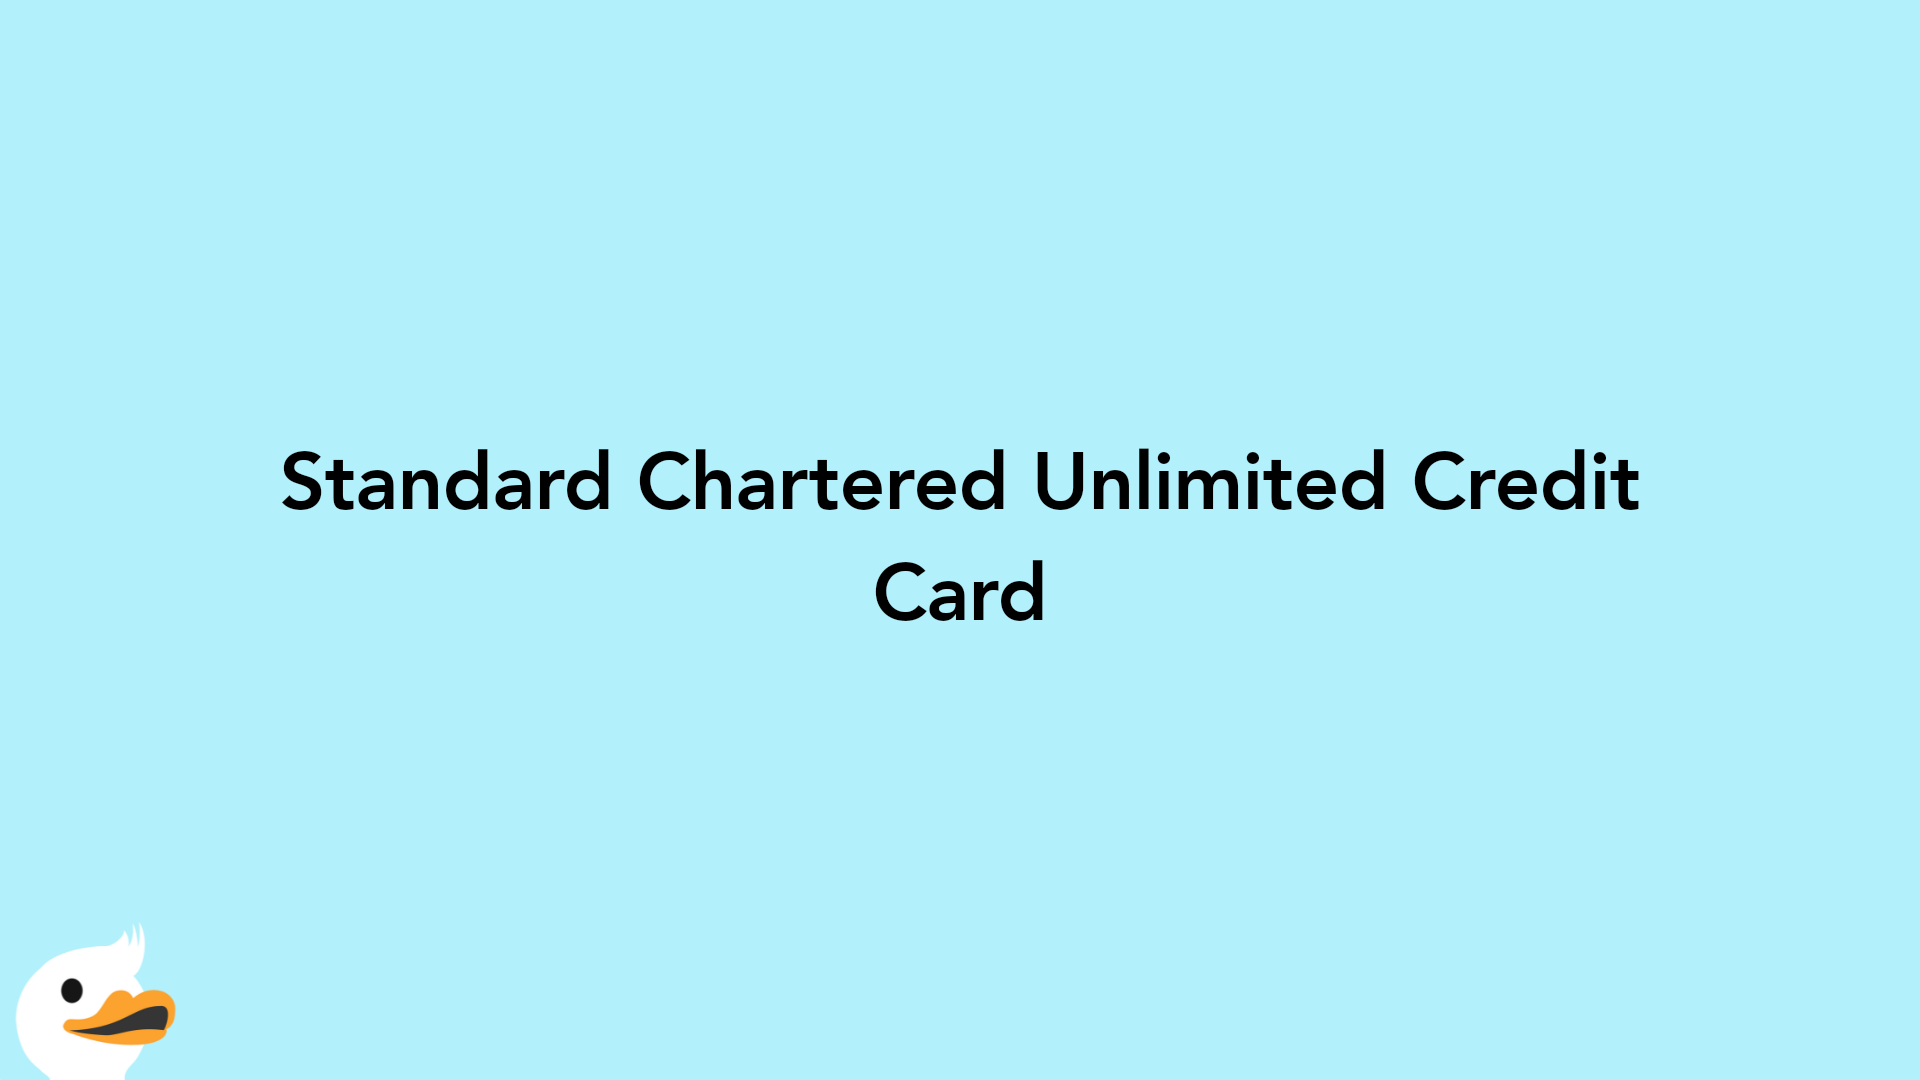 Standard Chartered Unlimited Credit Card